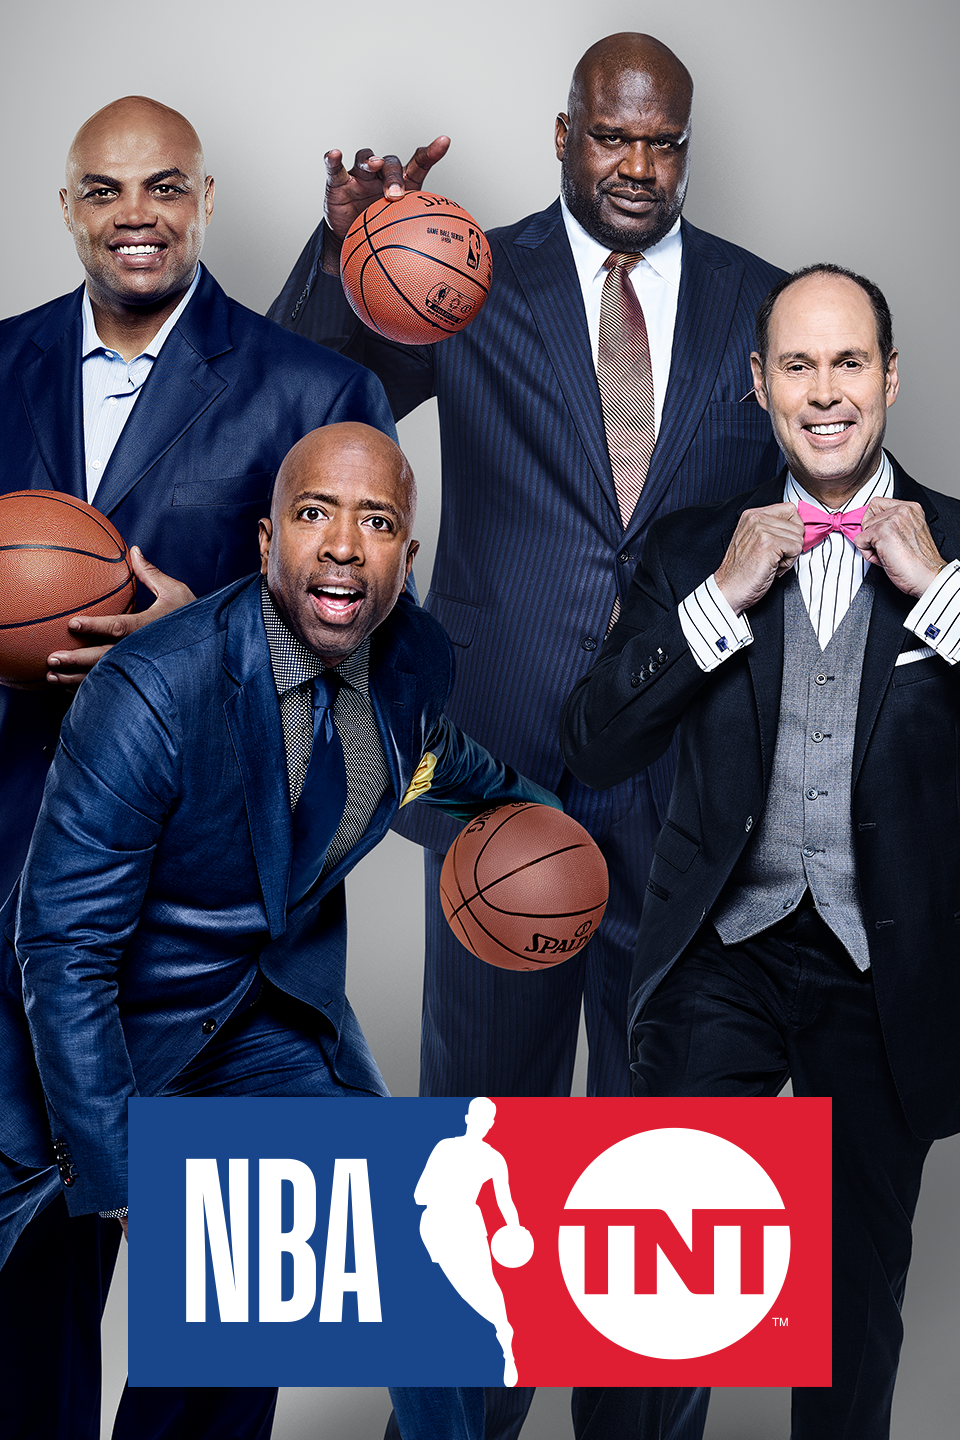 NBA on TNT - NBA on TNT updated their cover photo.